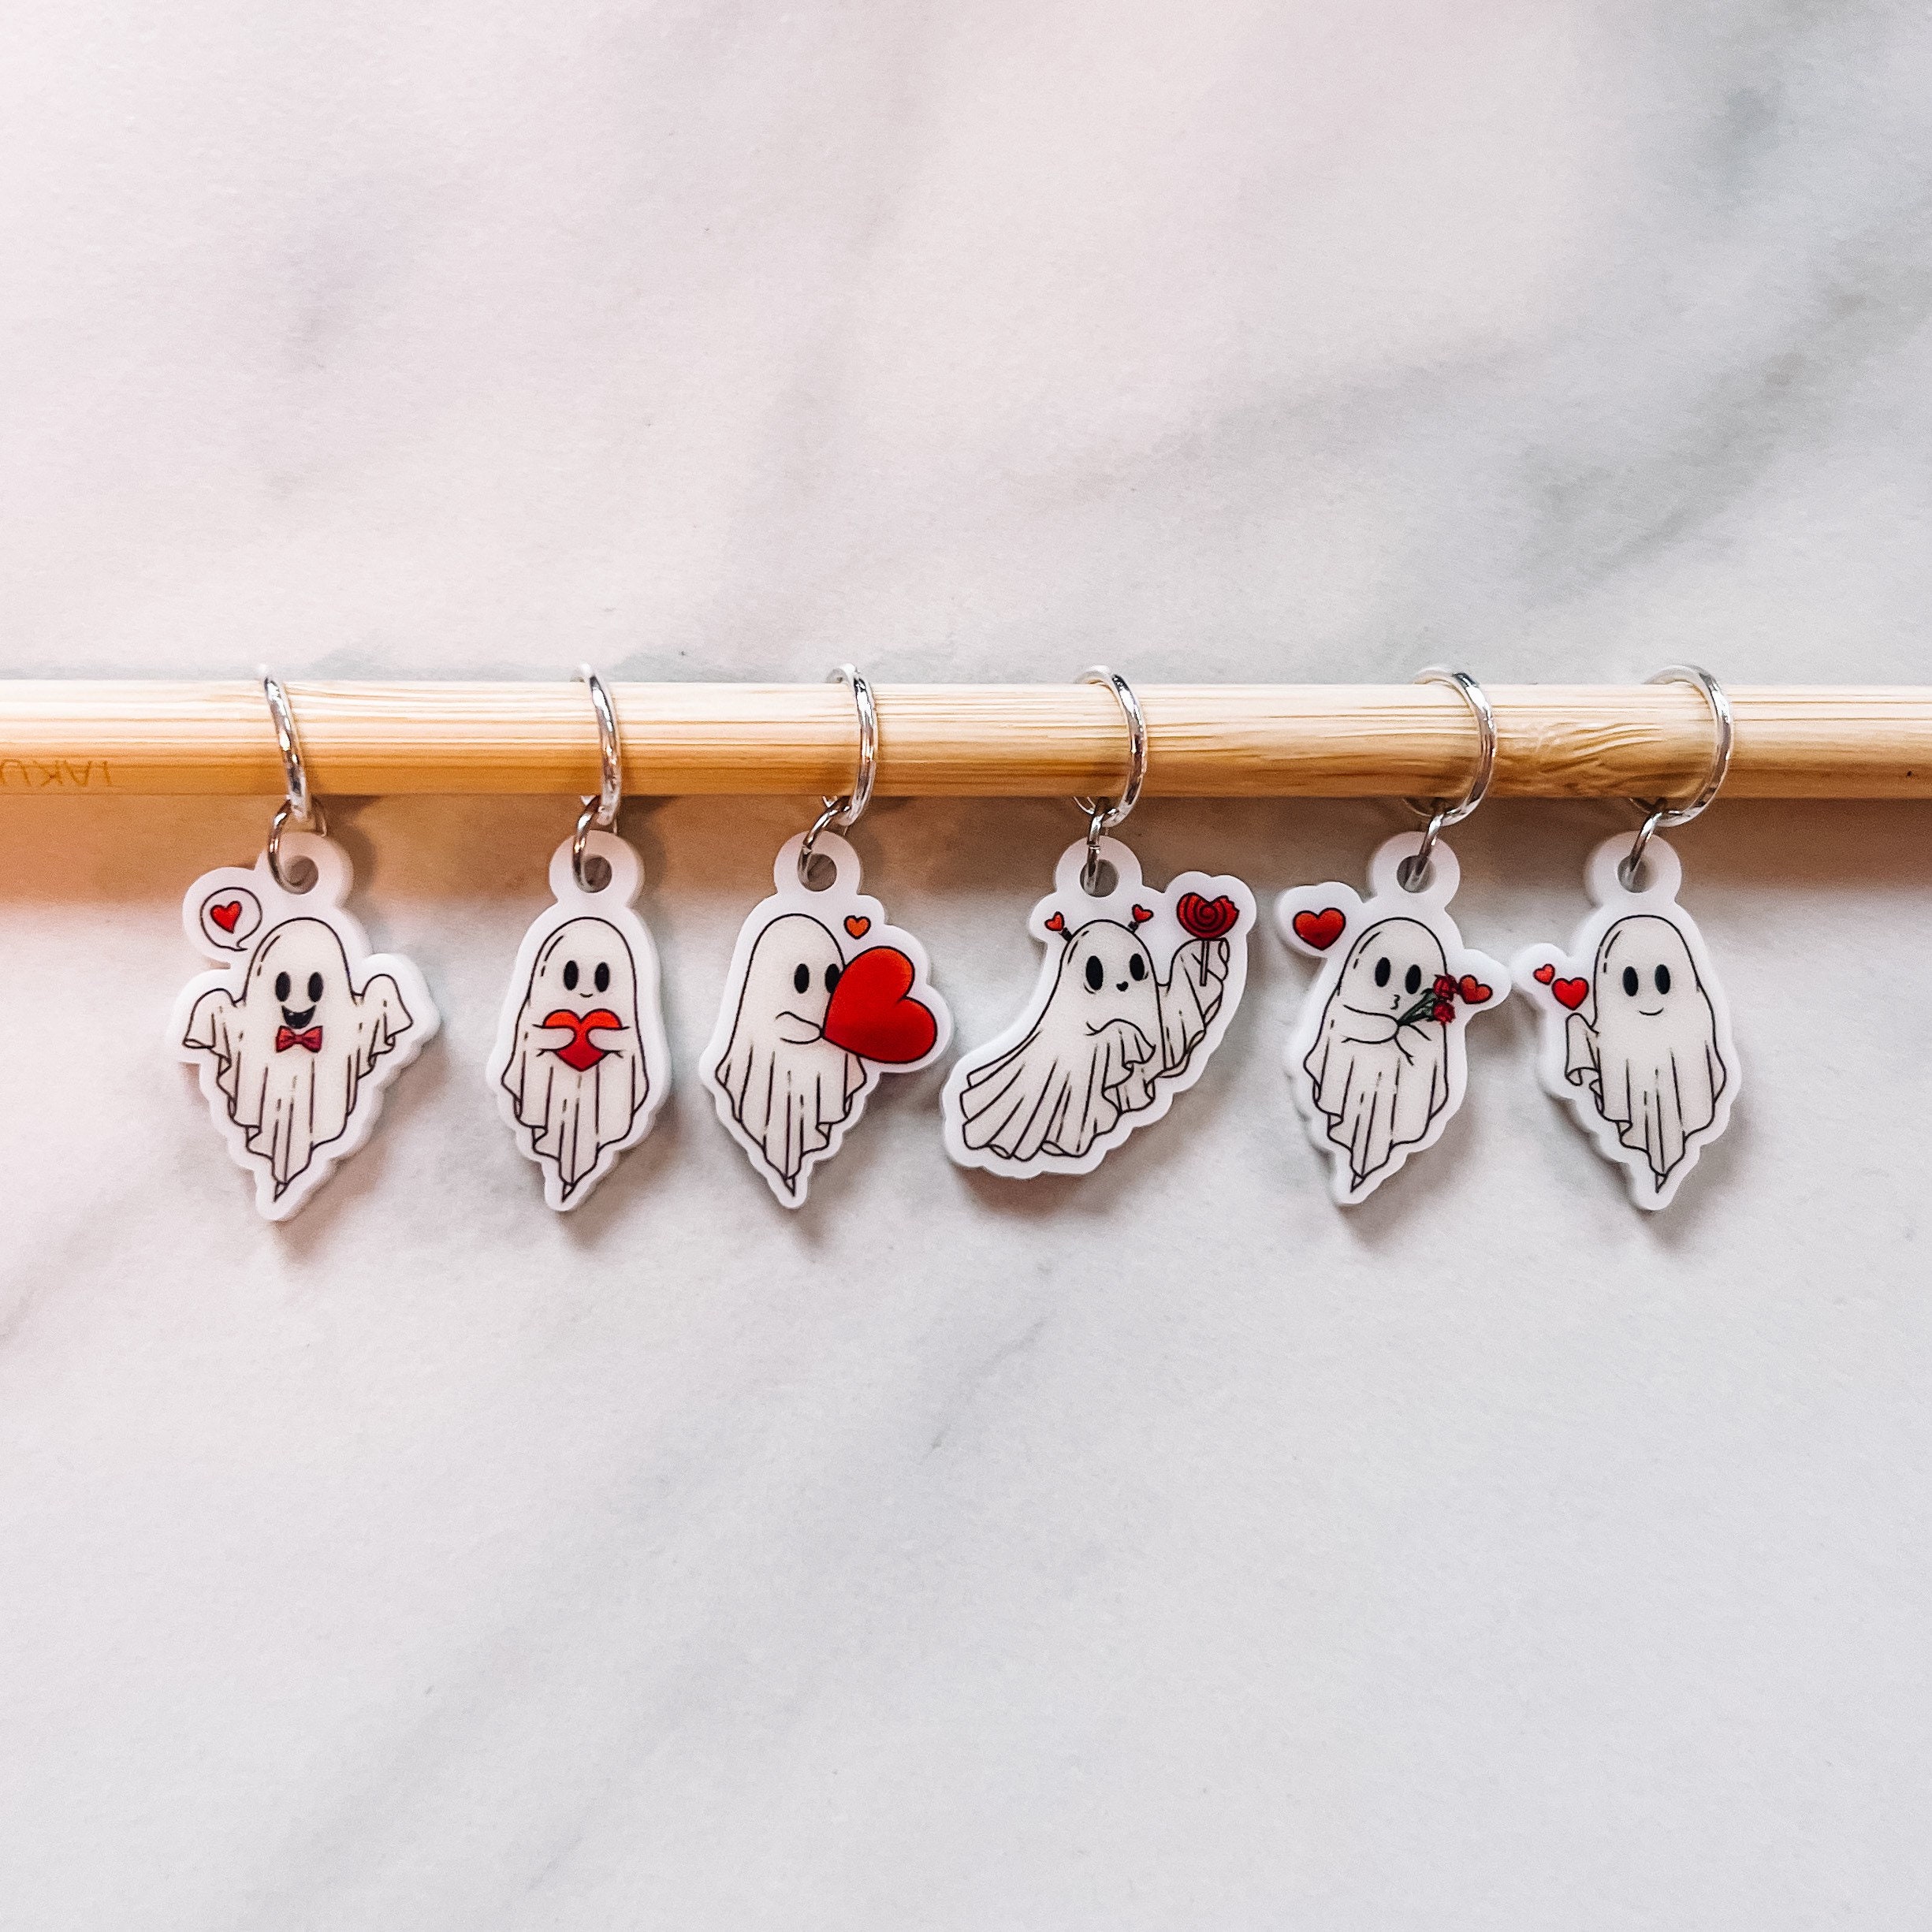 Mushroom Stitch Markers Laser Engraved Knitting and Crochet Progress  Keepers Cottagecore Knitting Crochet Tools 